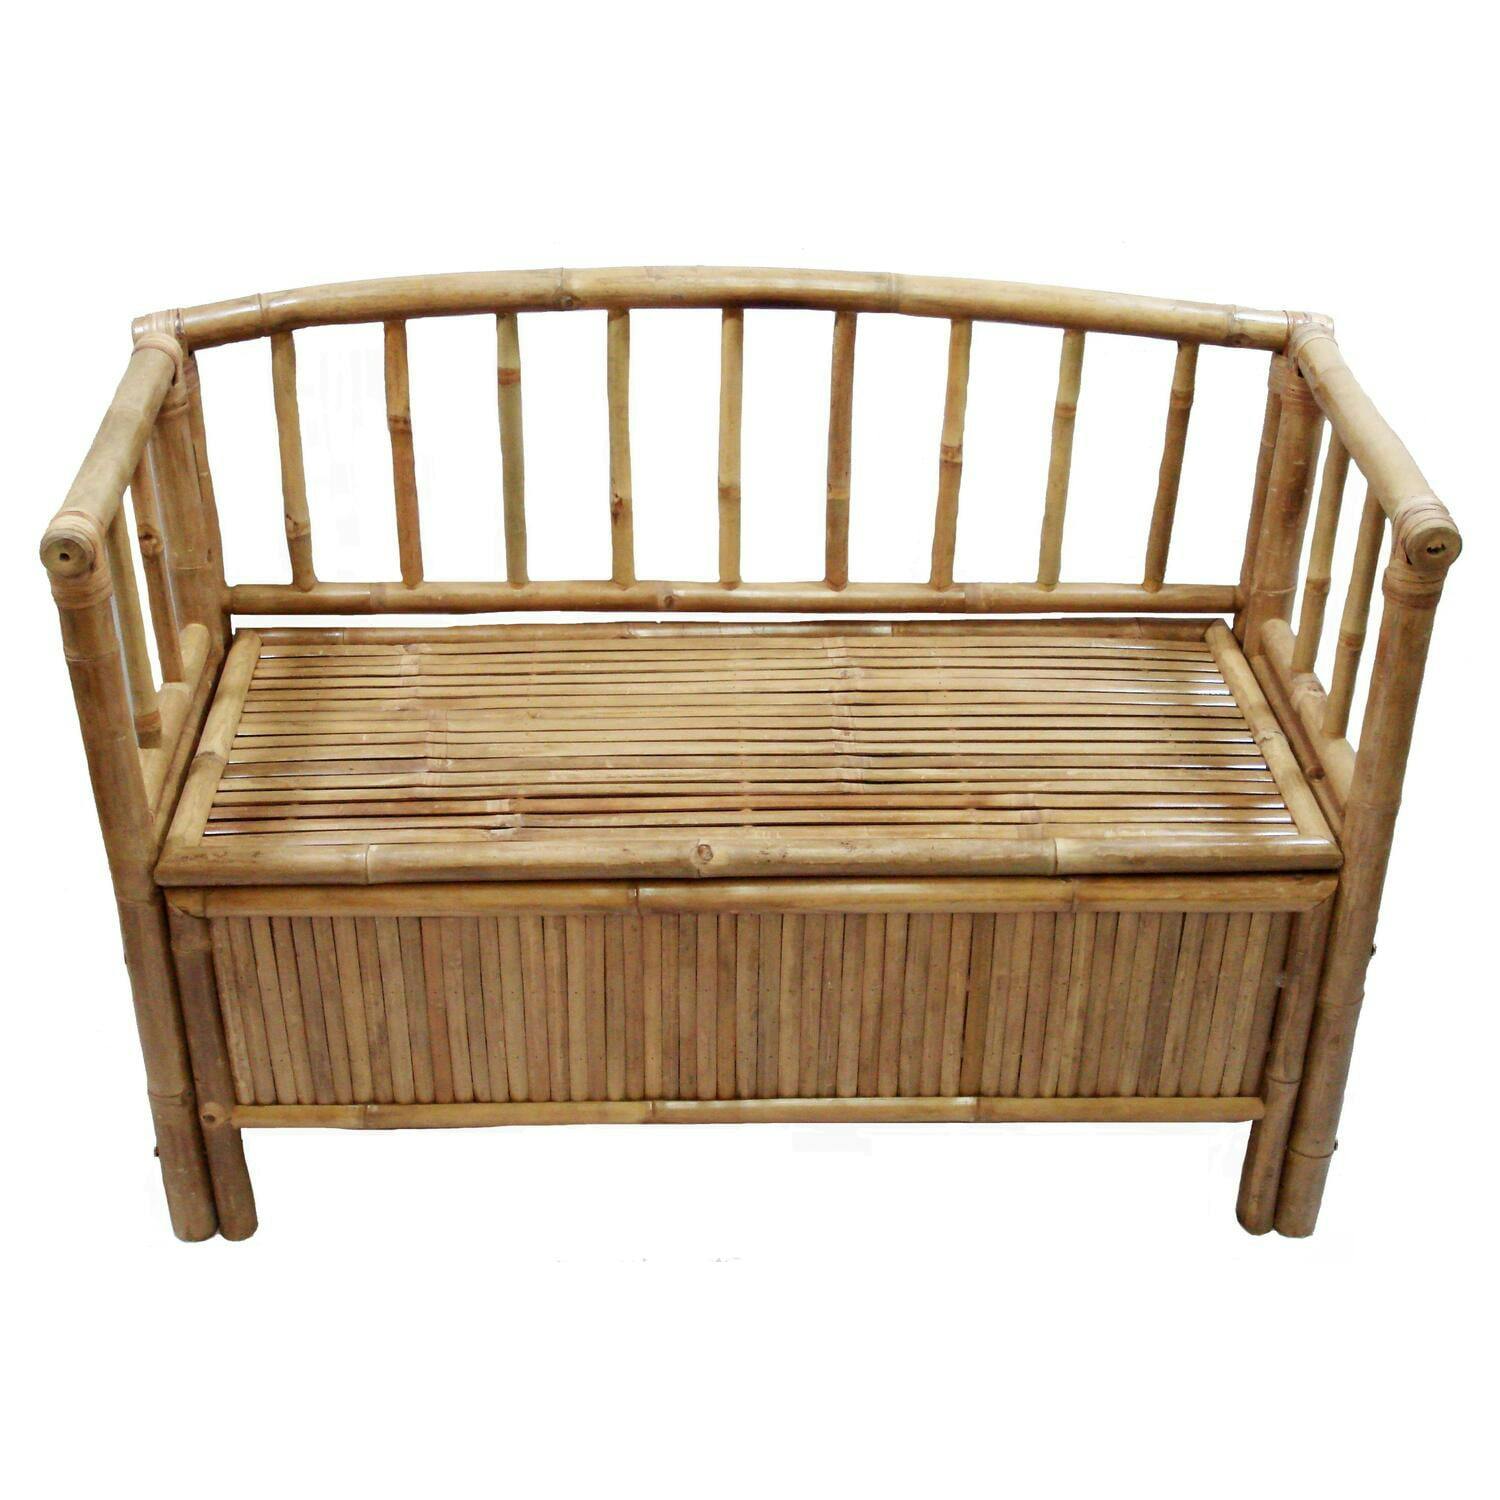 Tropical Bamboo 44" Bench with Under-Seat Storage